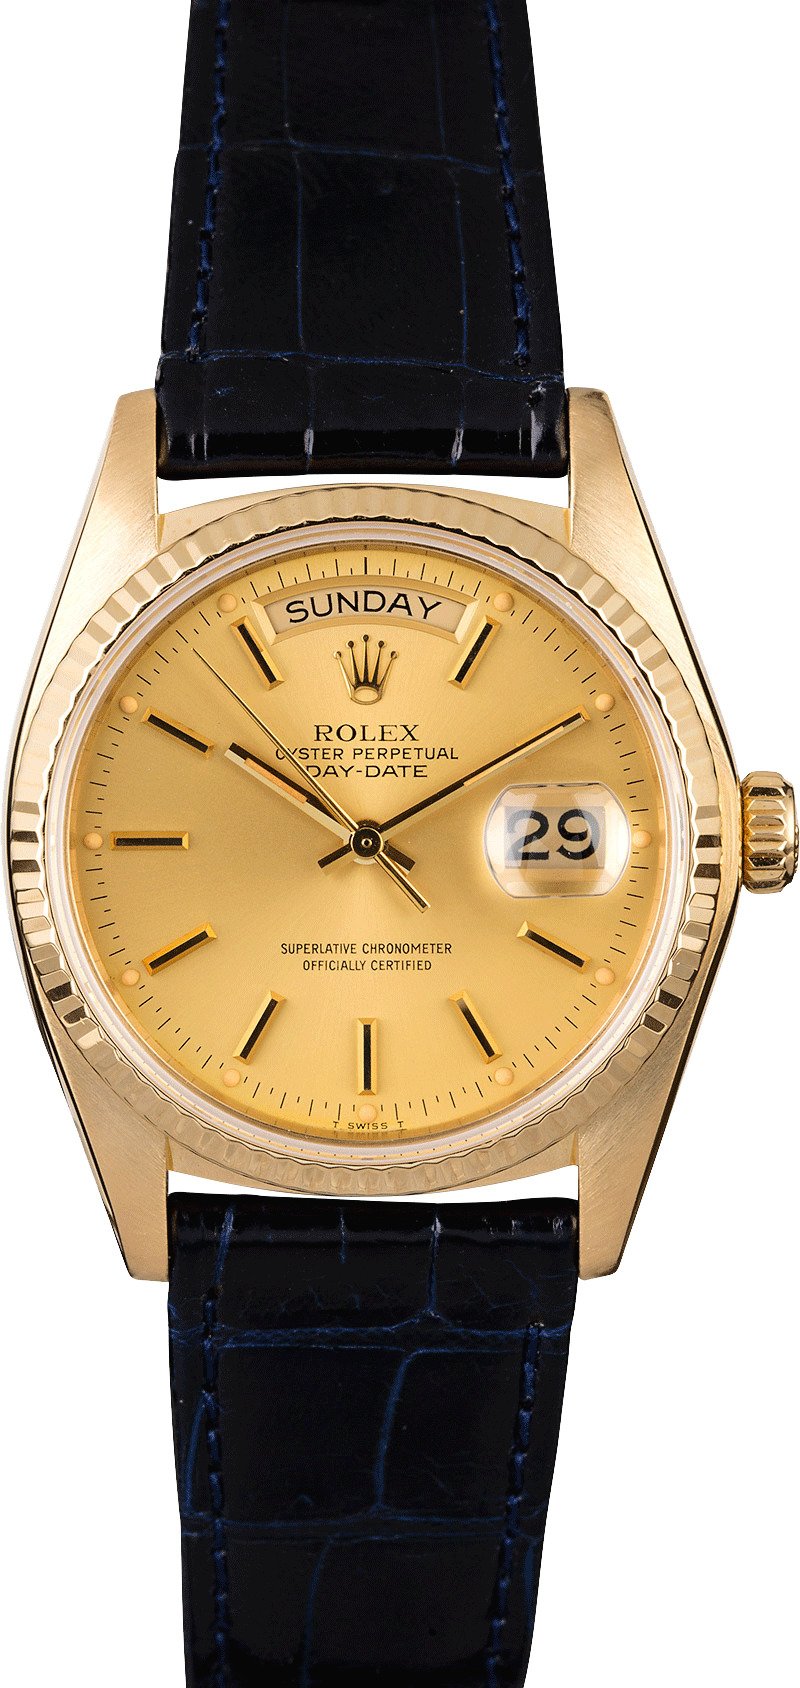 rolex day date 36mm leather strap